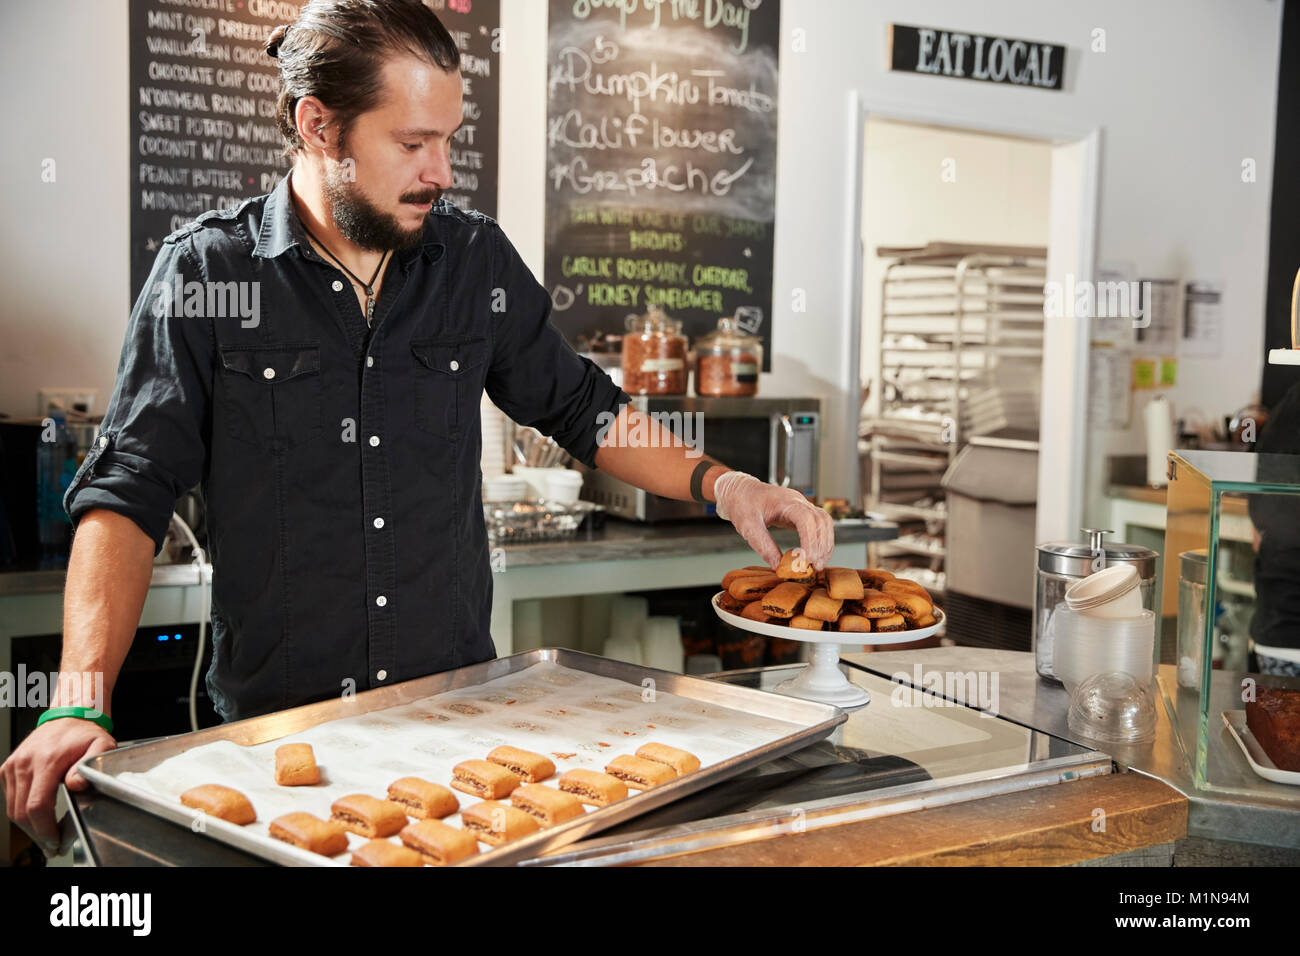 Waiter Behind Counter In Coffee Shop Arranging Cookie Display Stock Photo